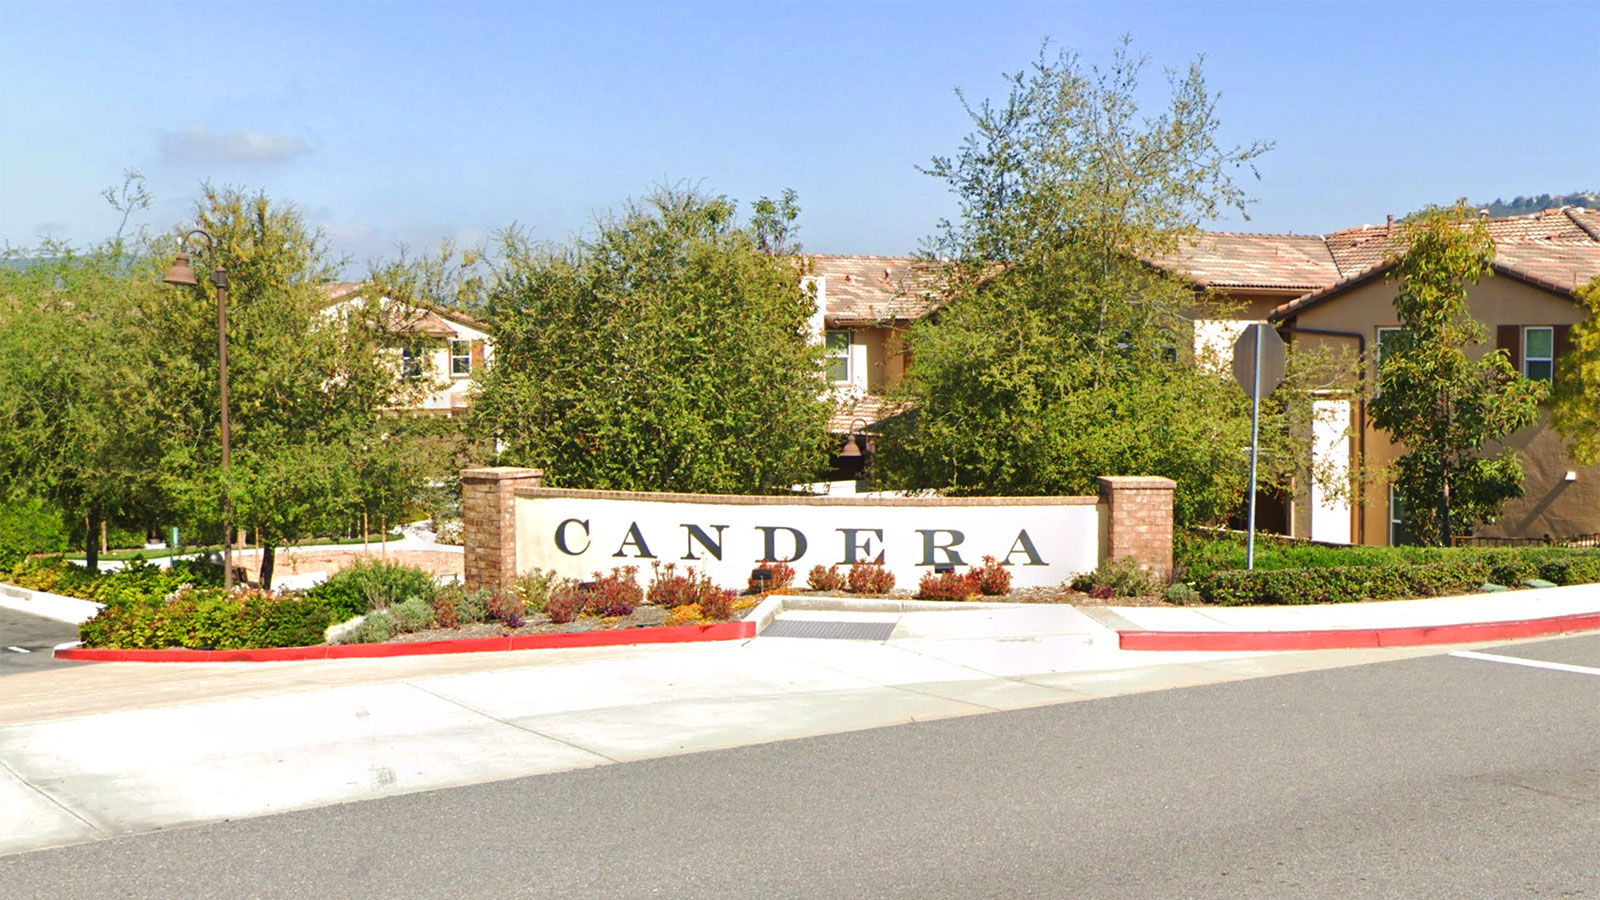 Candera Owners Association